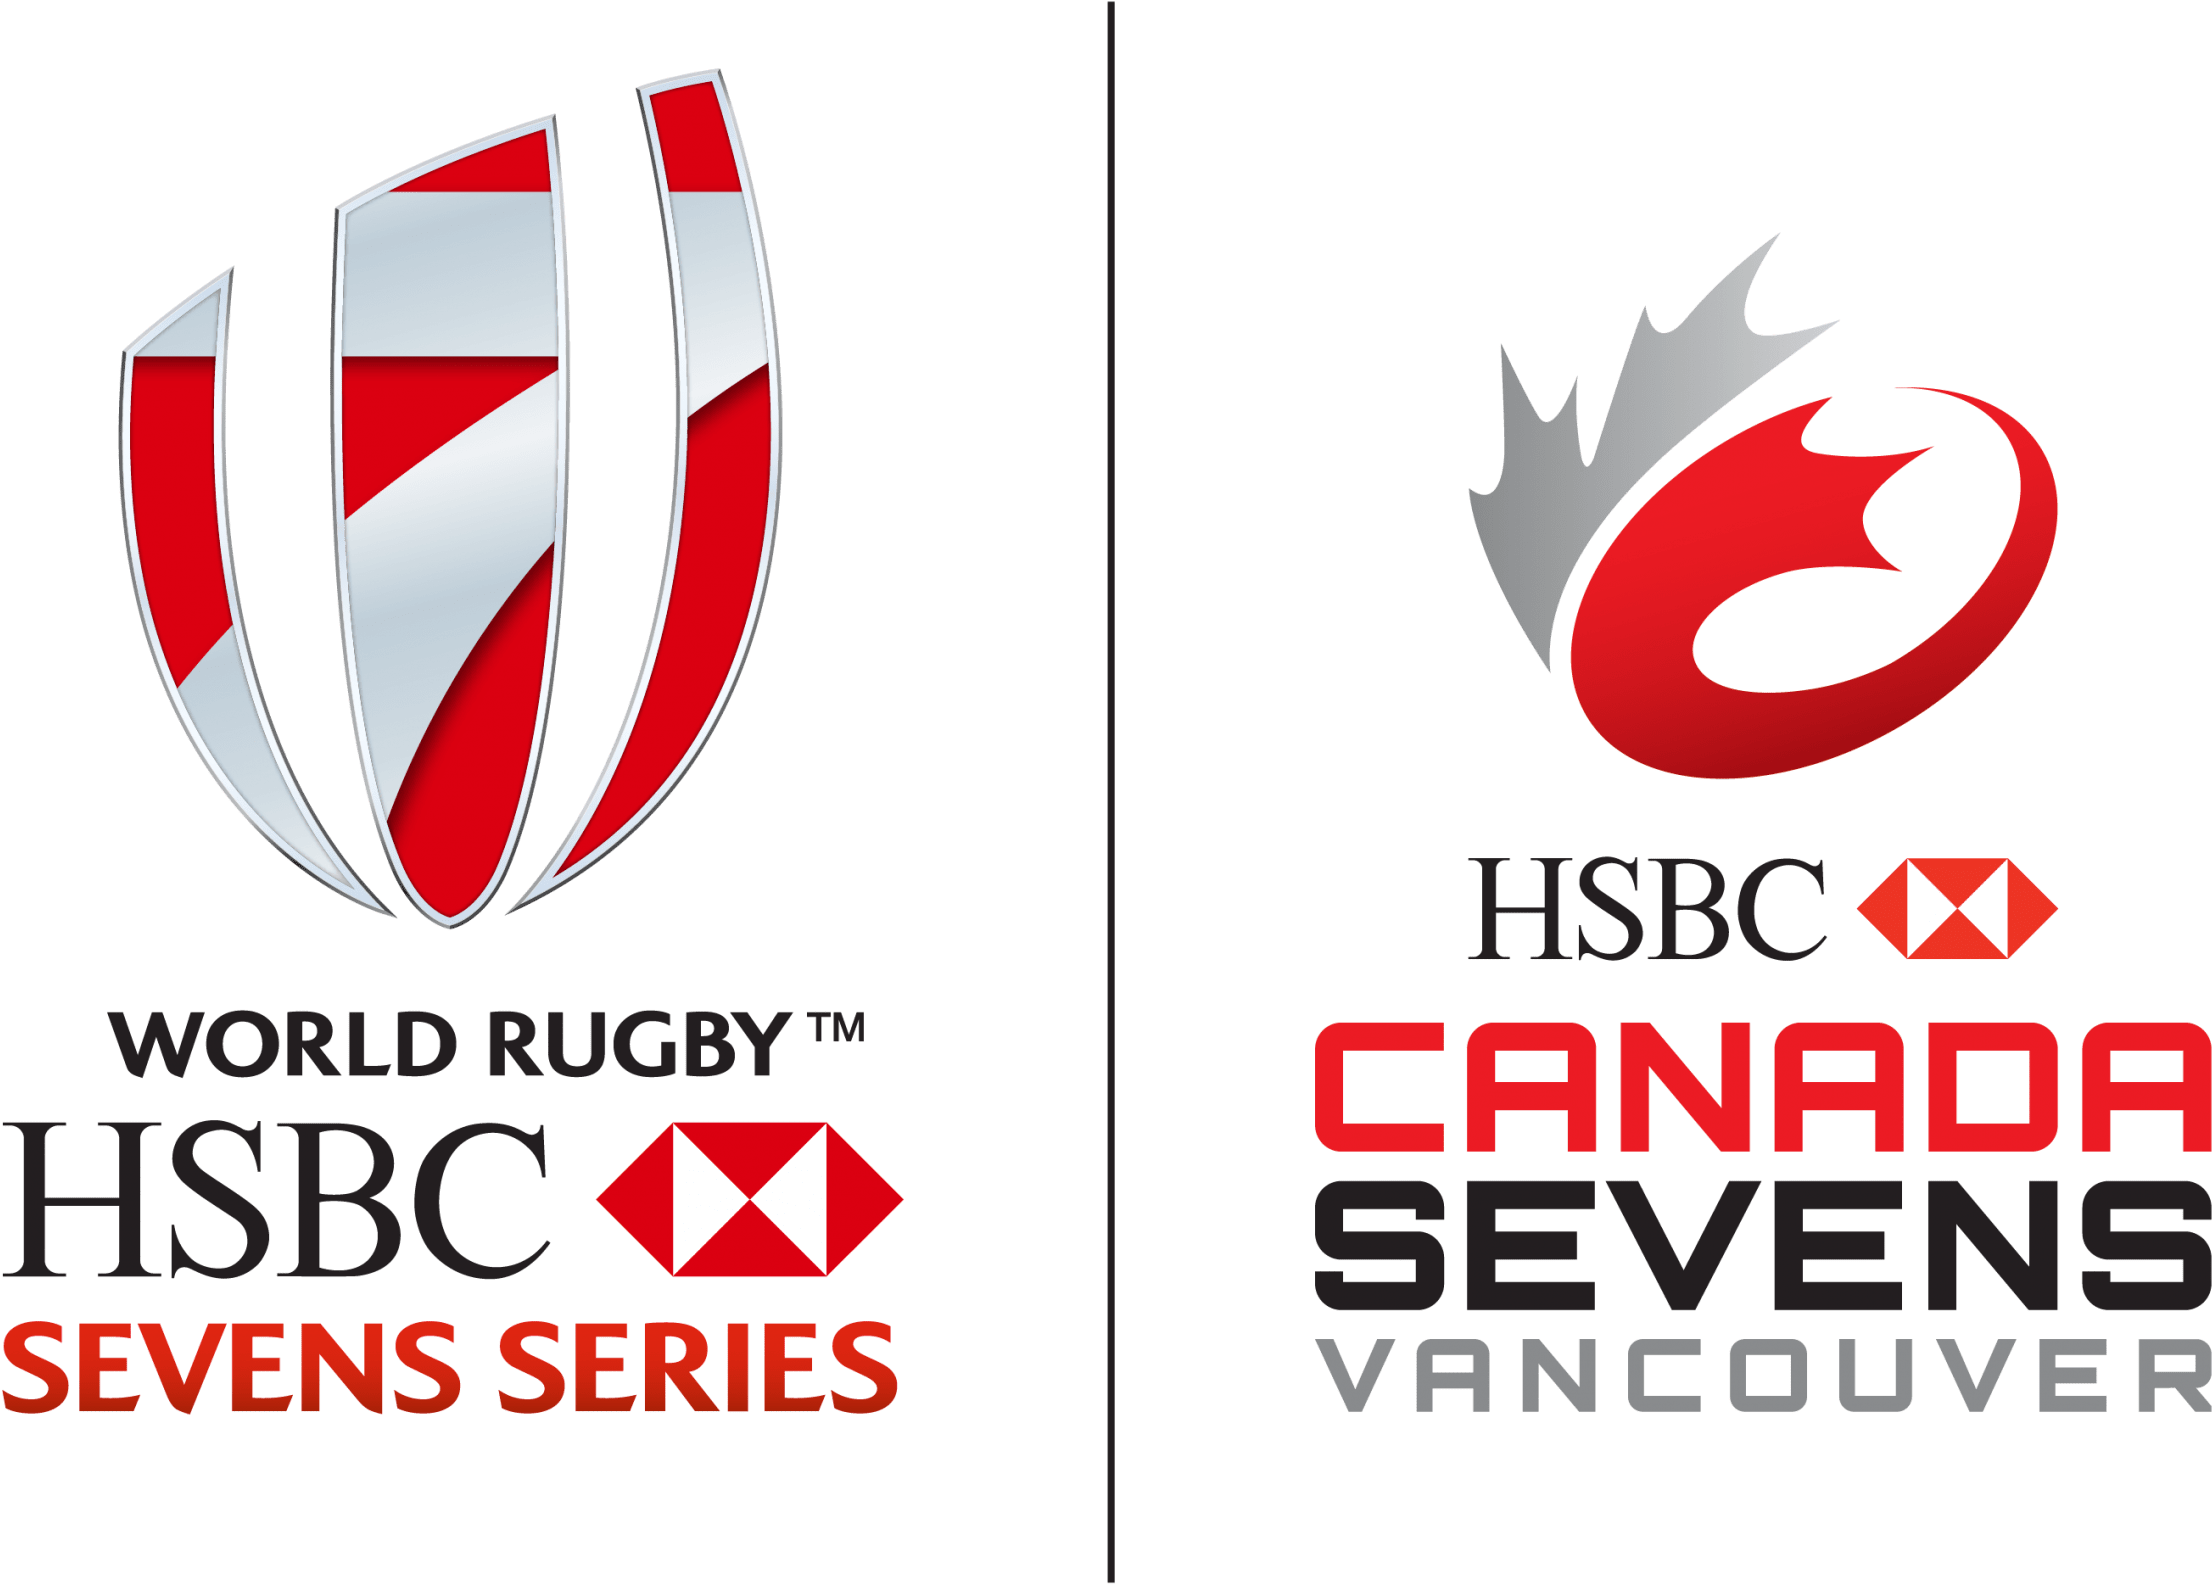 Share This World Rugby Sevens Logo